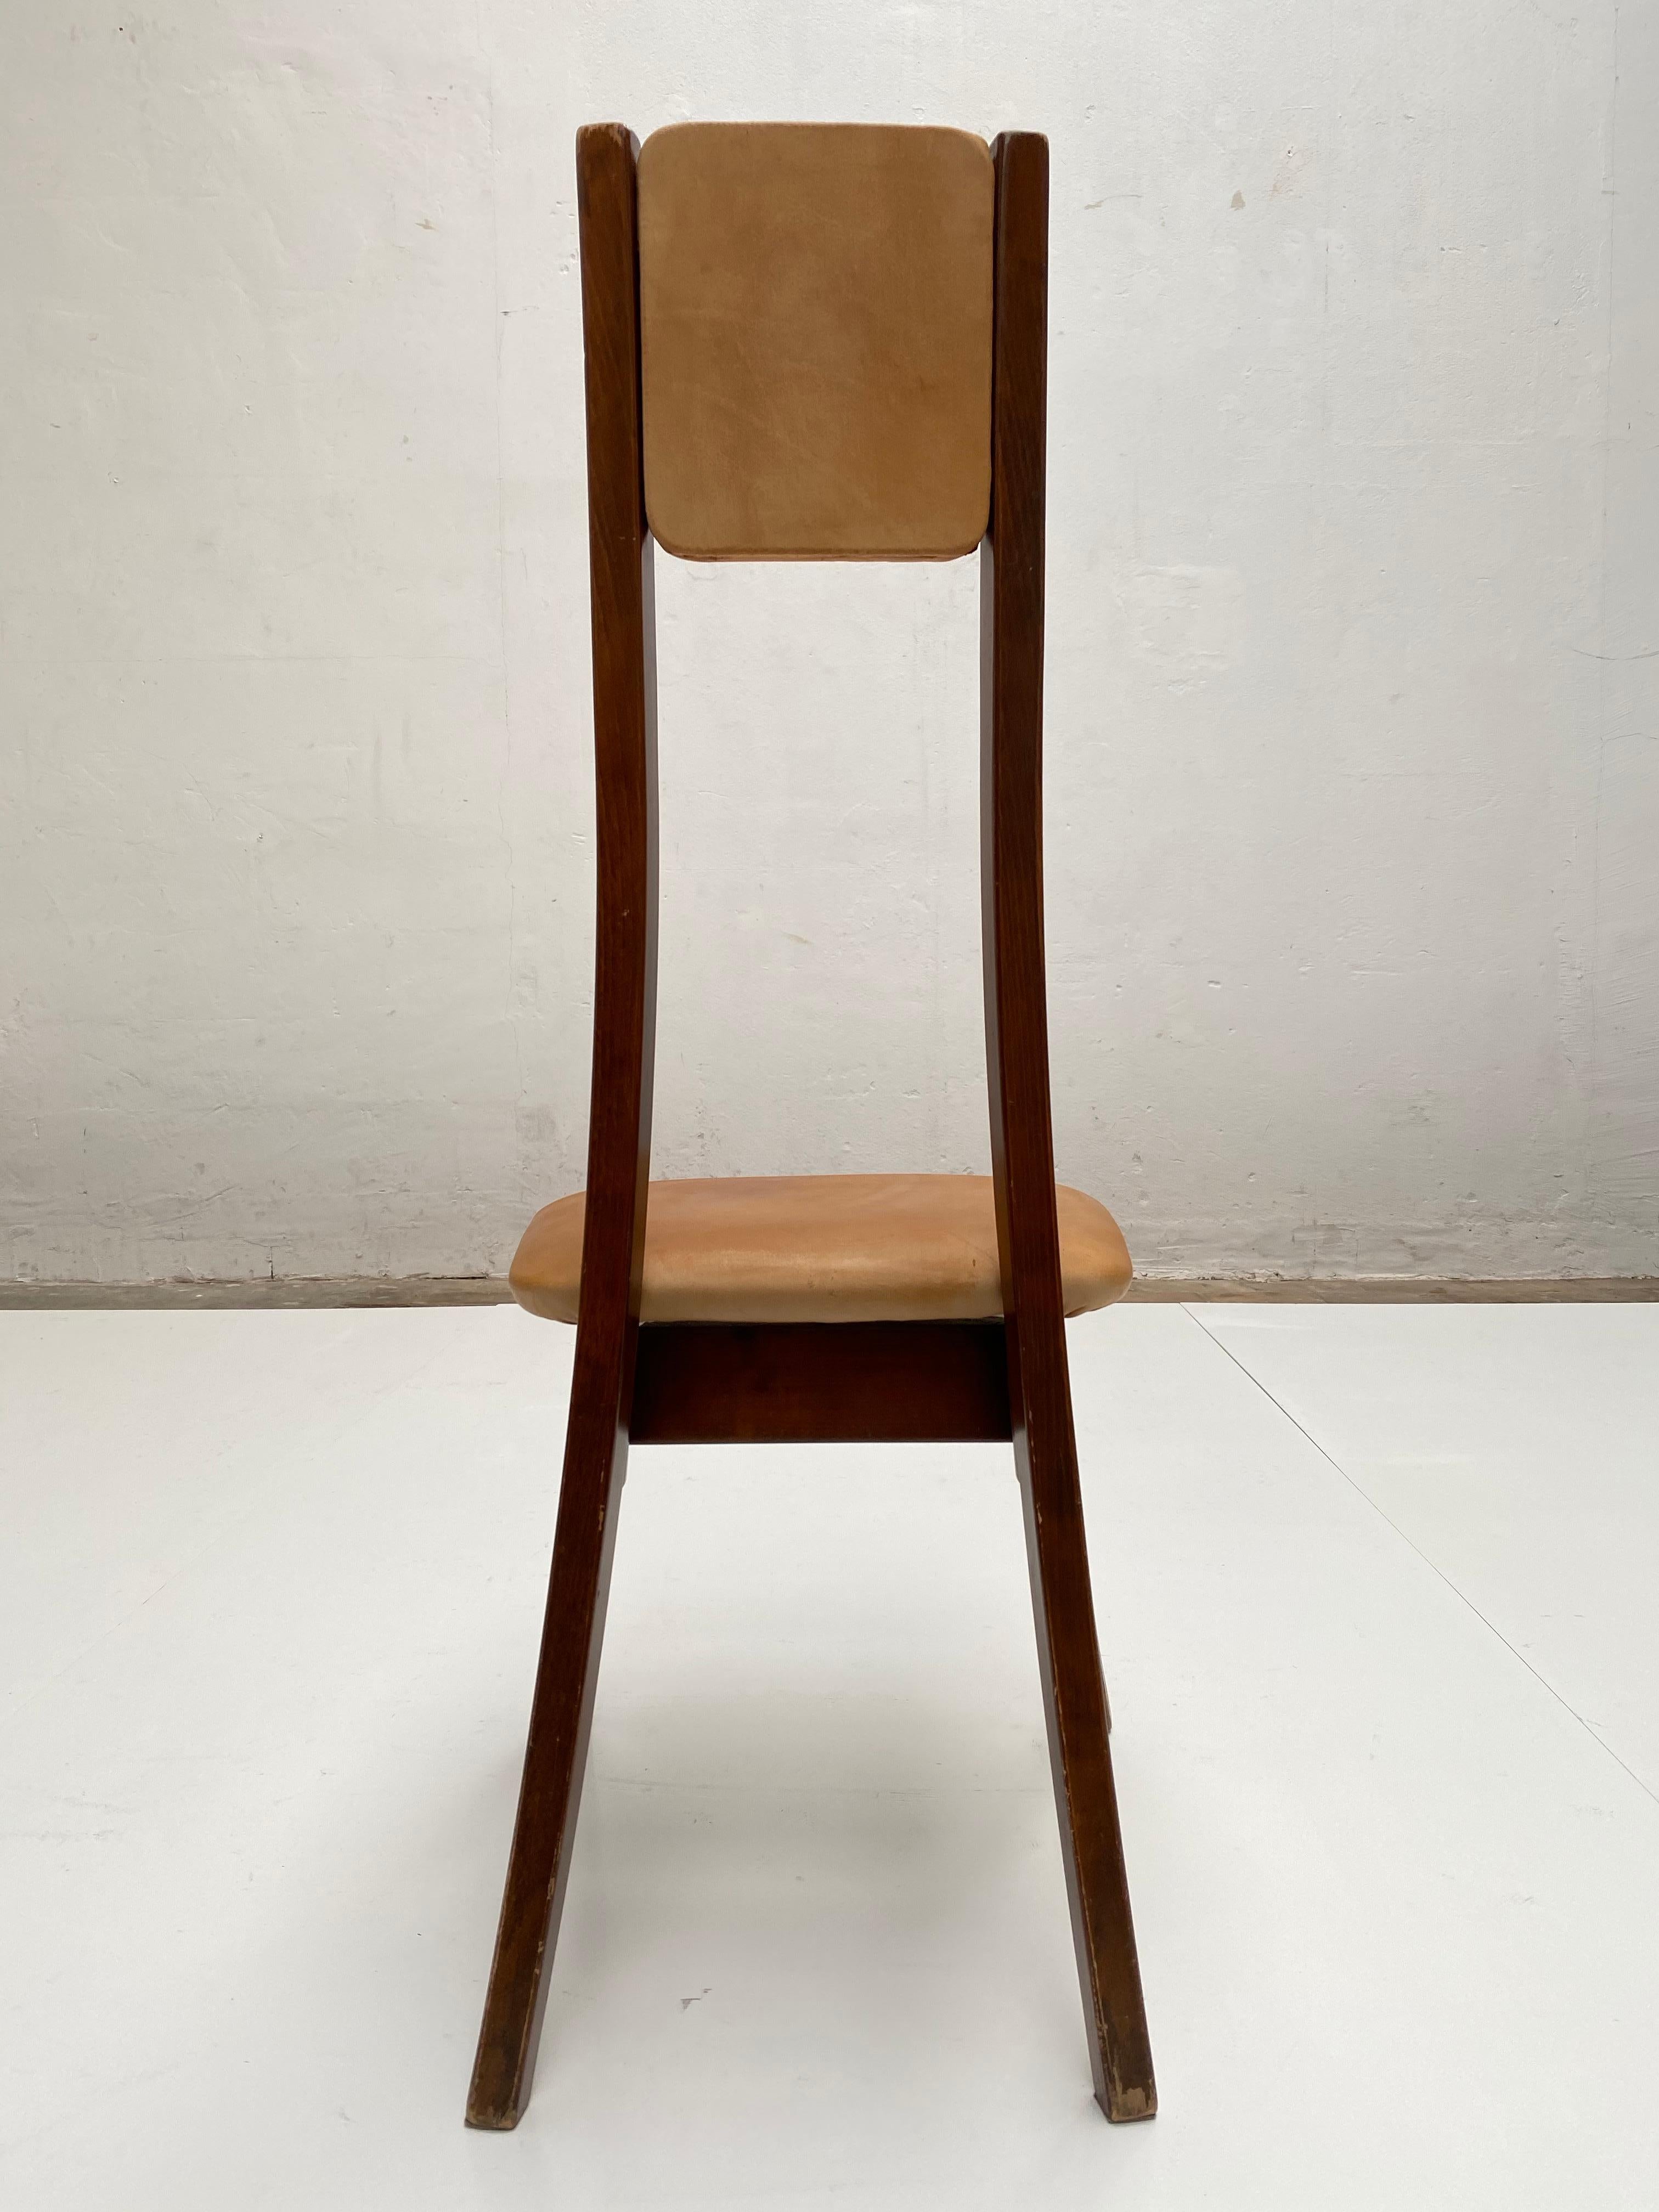 Six walnut  & Leather Mangiarotti 'S11' Dining Chairs, Sorgente Dei Mobili 1972 In Fair Condition For Sale In bergen op zoom, NL